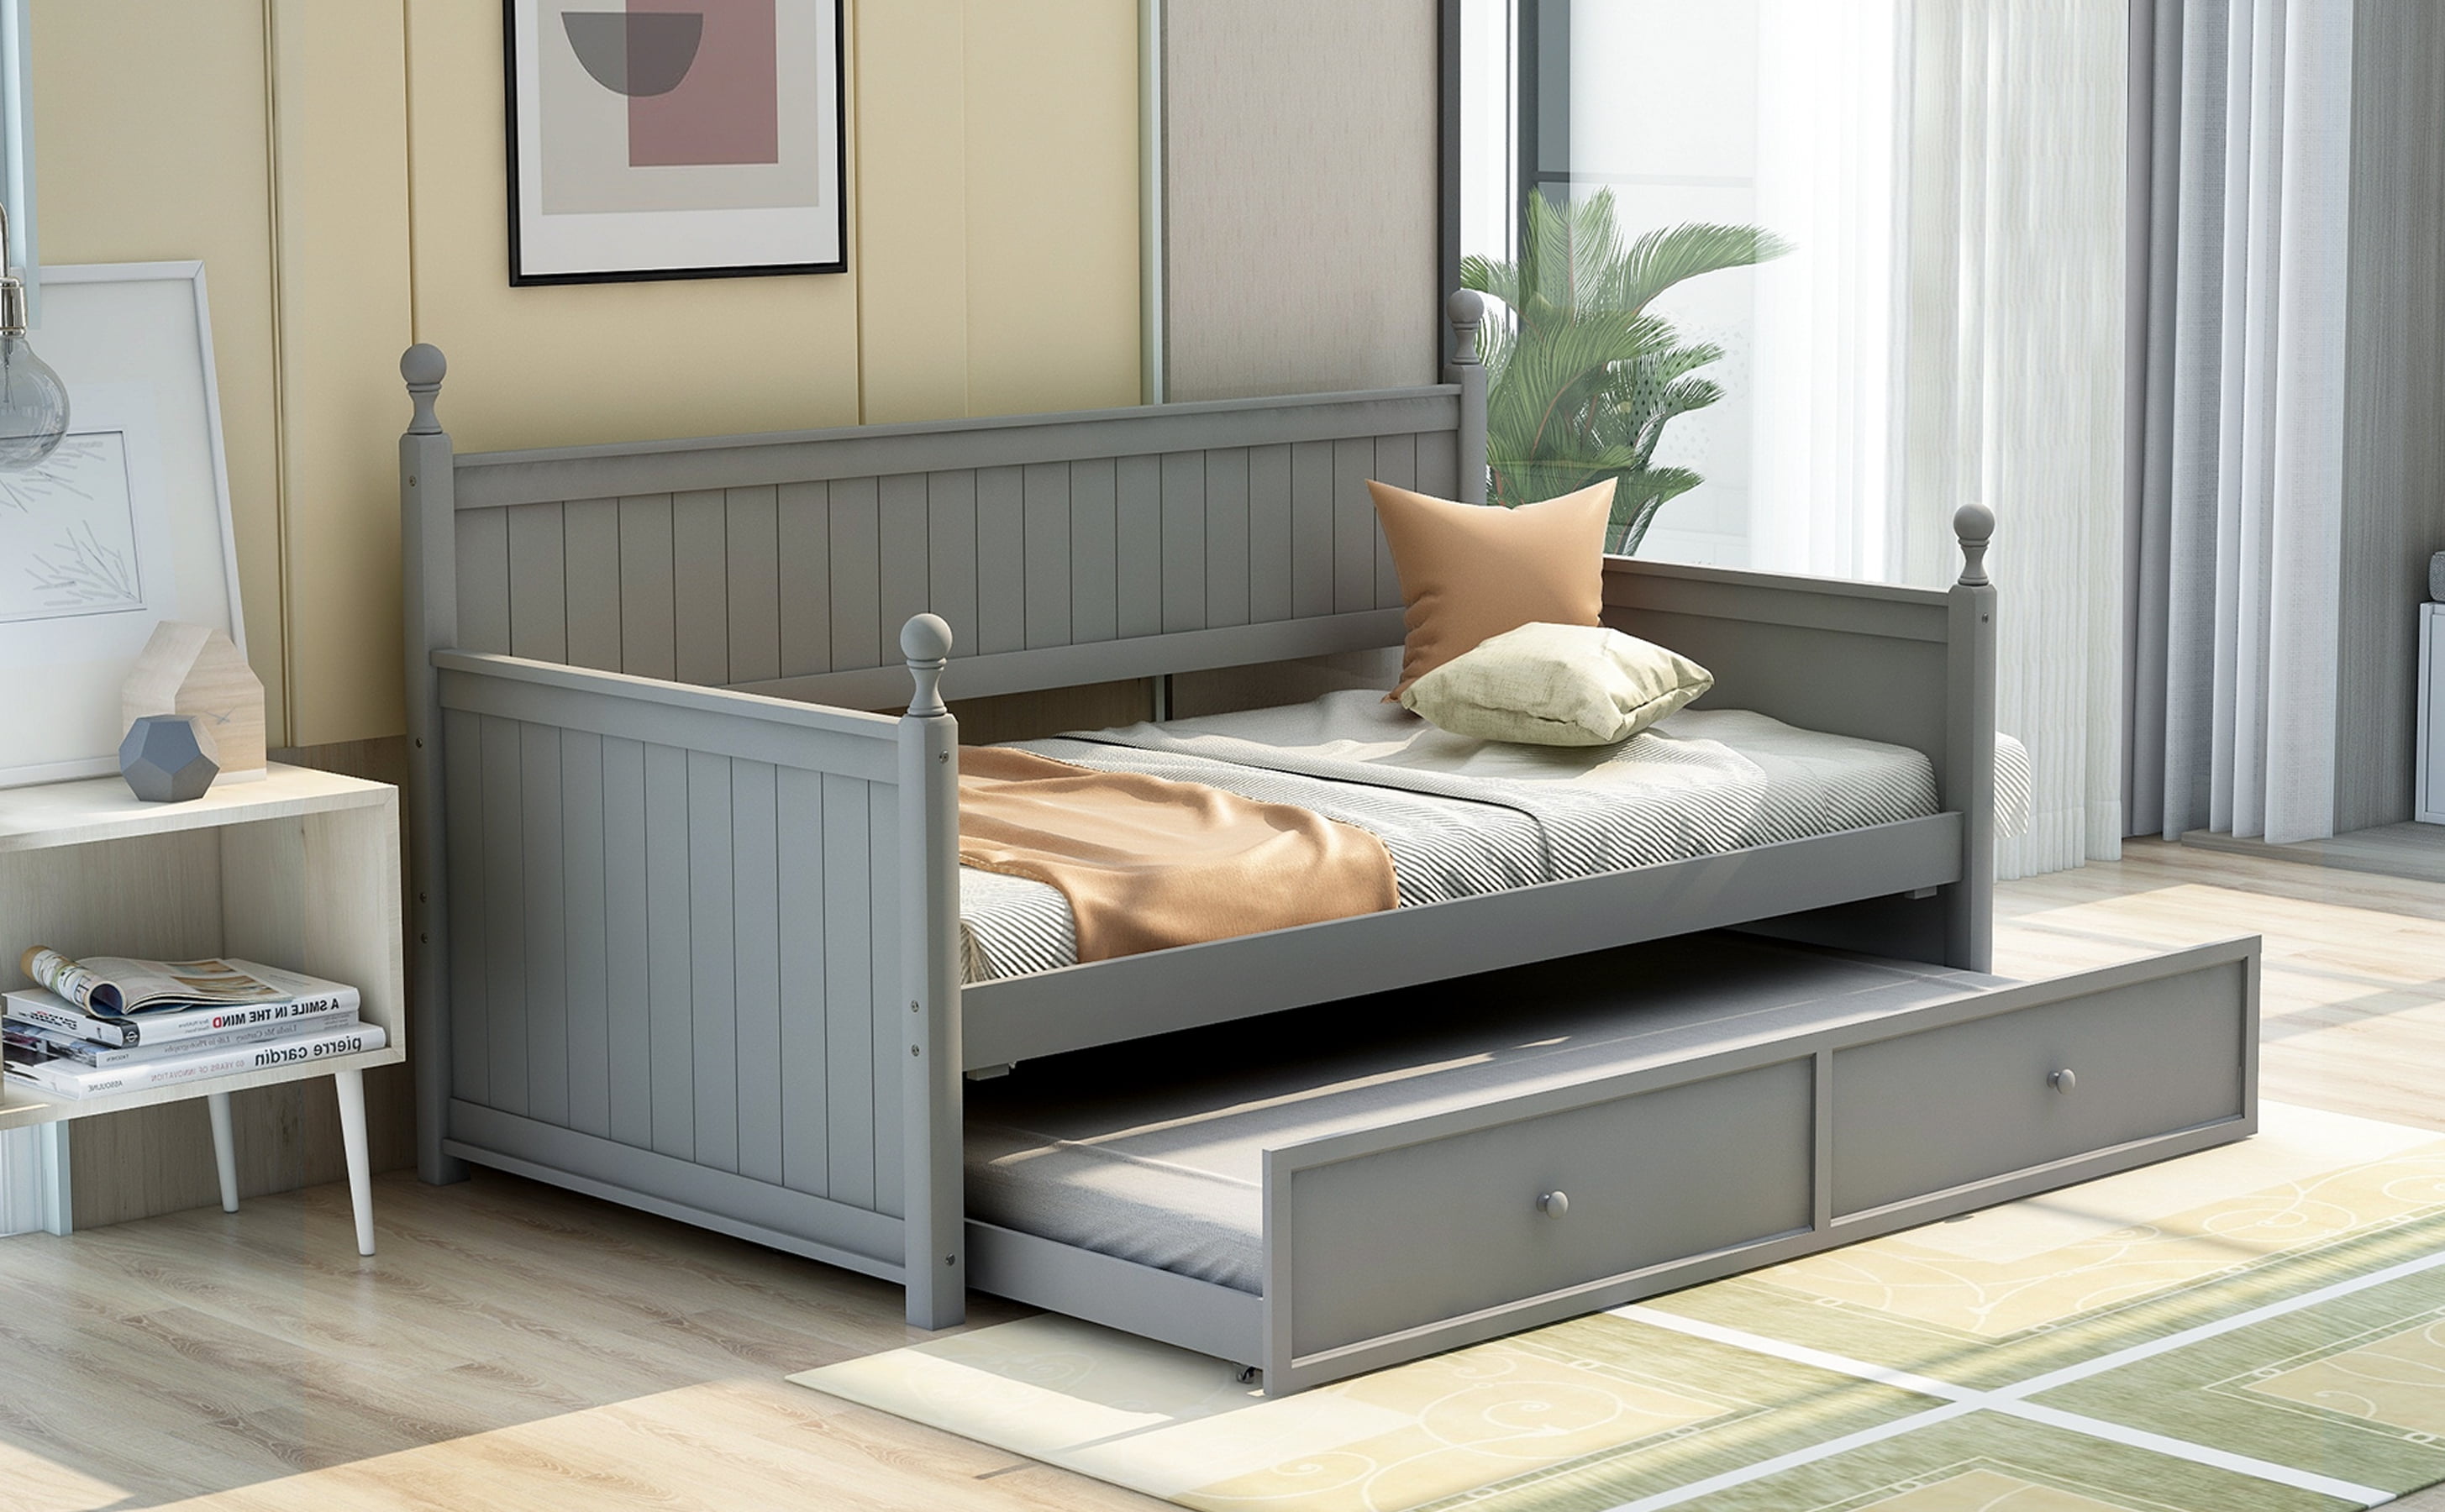 twin bed mattress included and frame